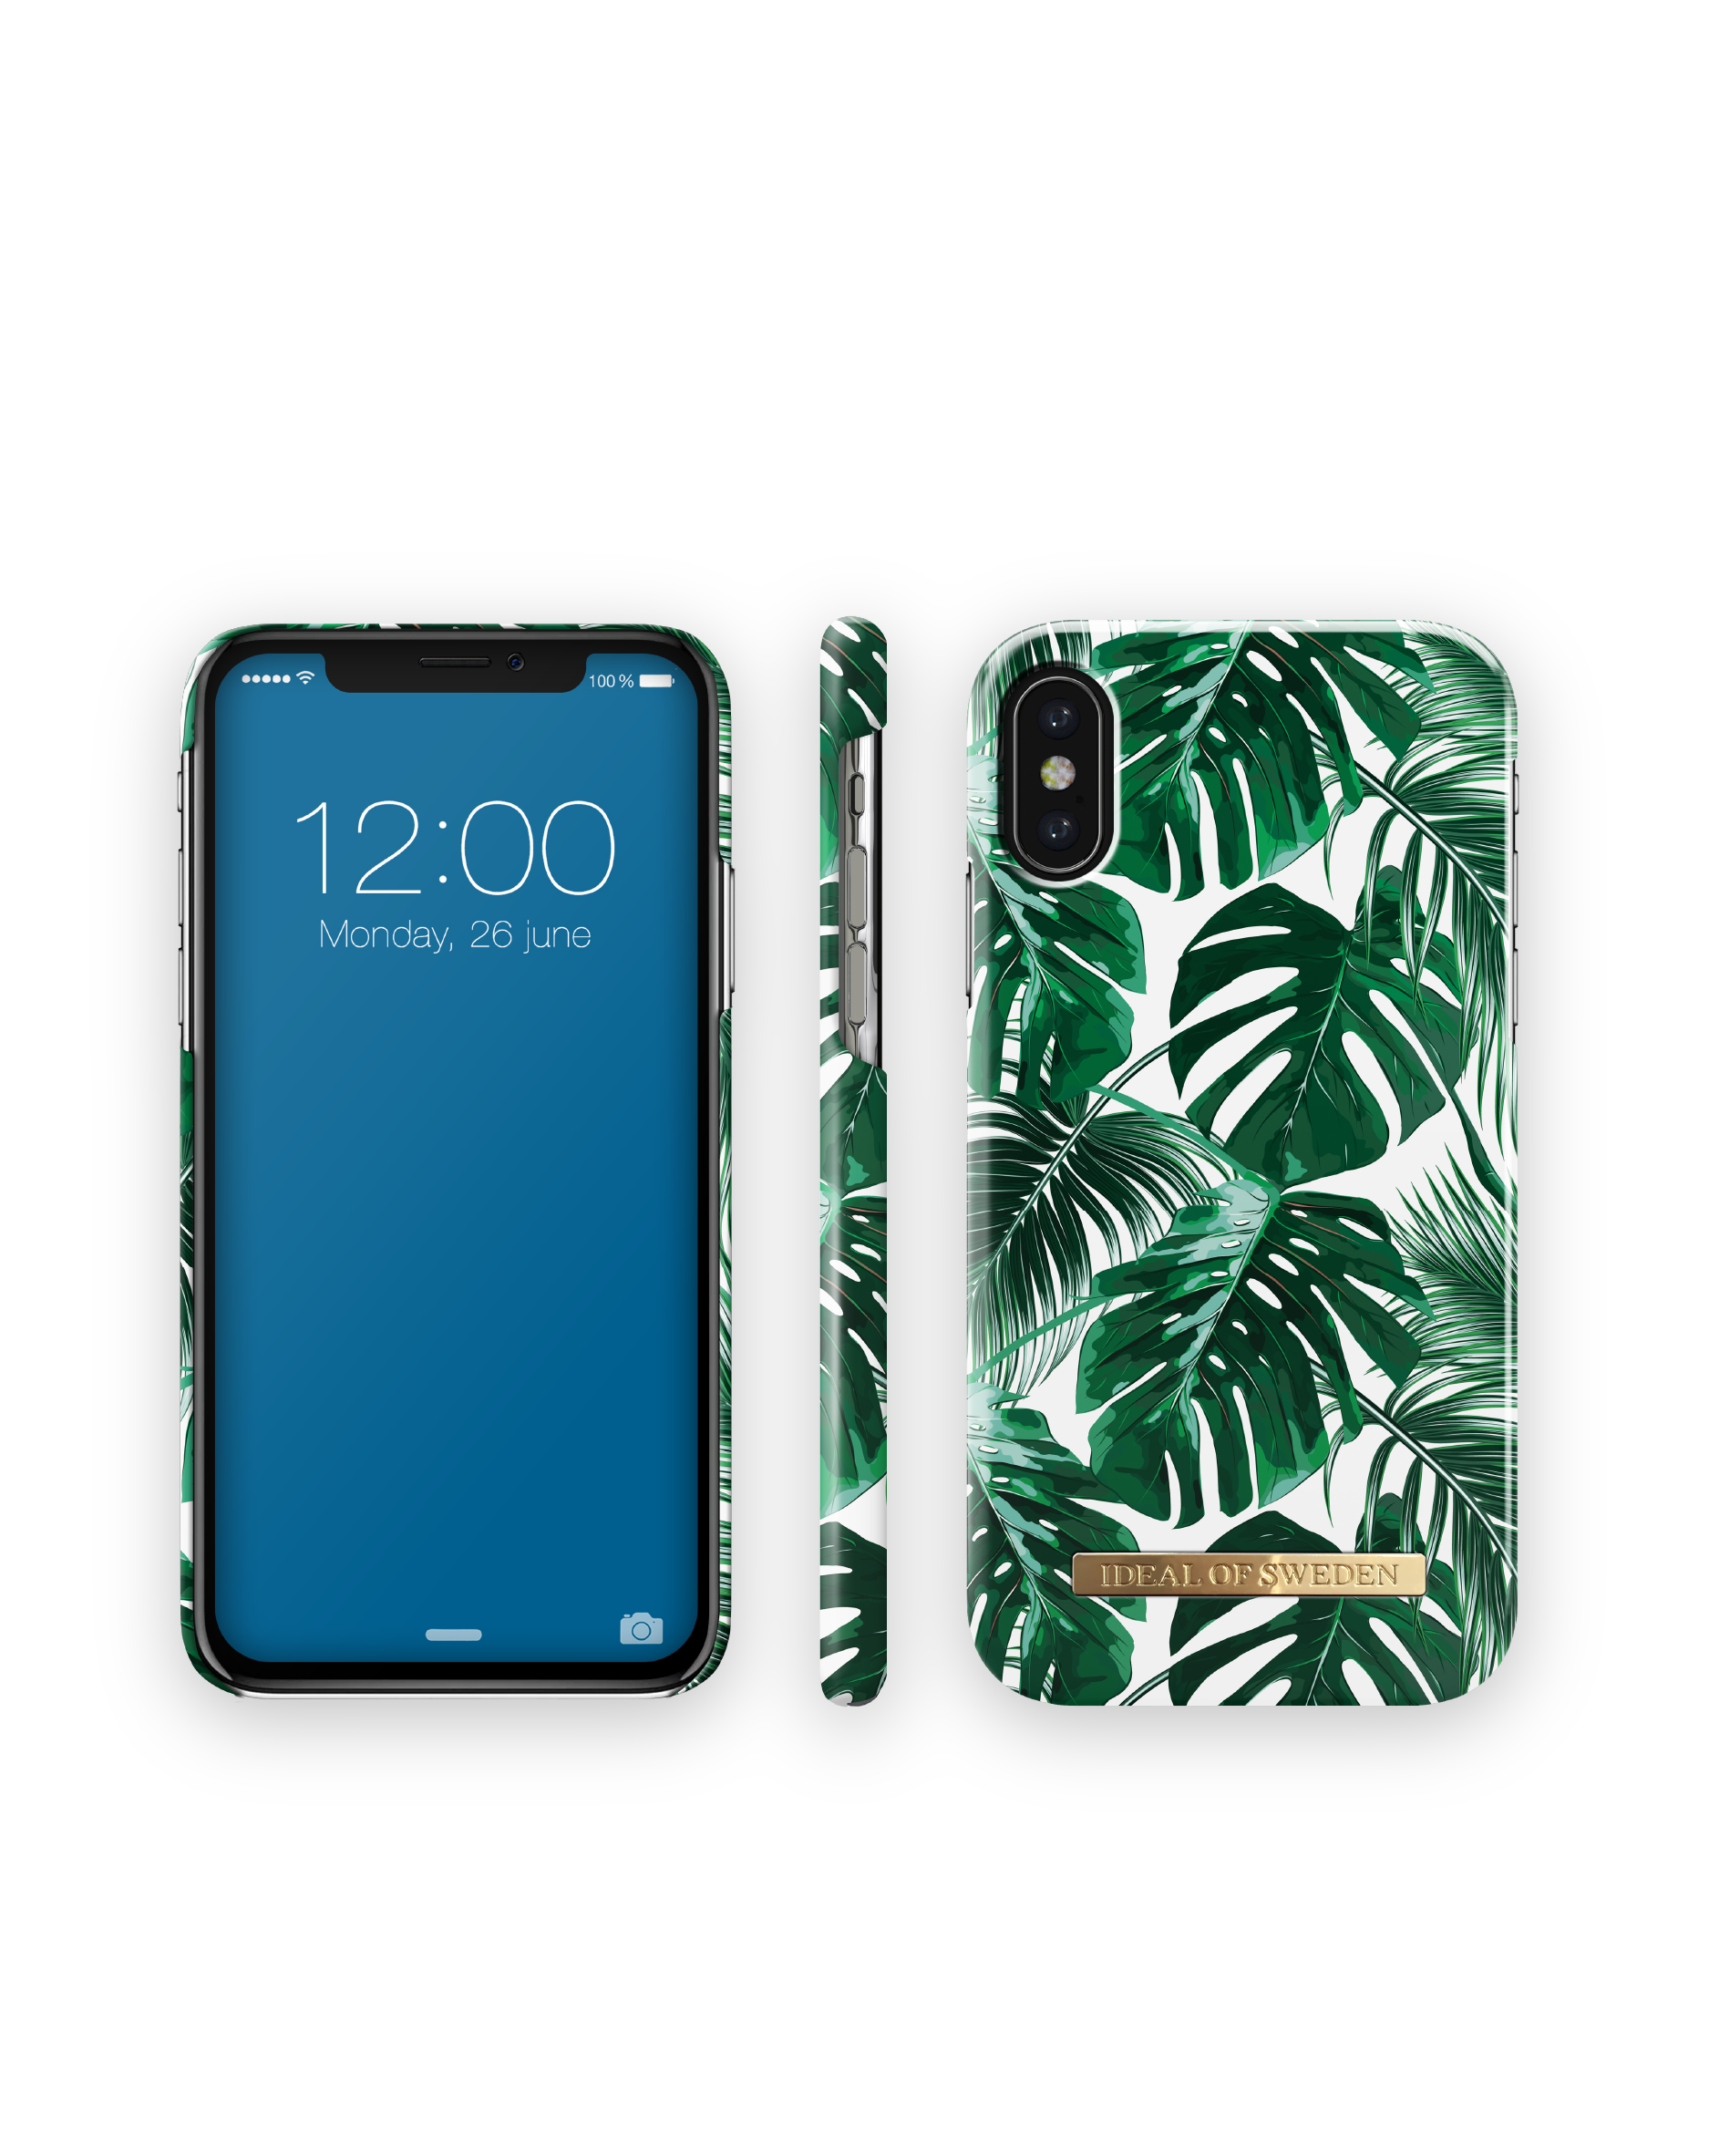 SWEDEN X, Apple, OF Backcover, XS, IDFCS17-IXS-61, IDEAL iPhone Monstera Jungle iPhone